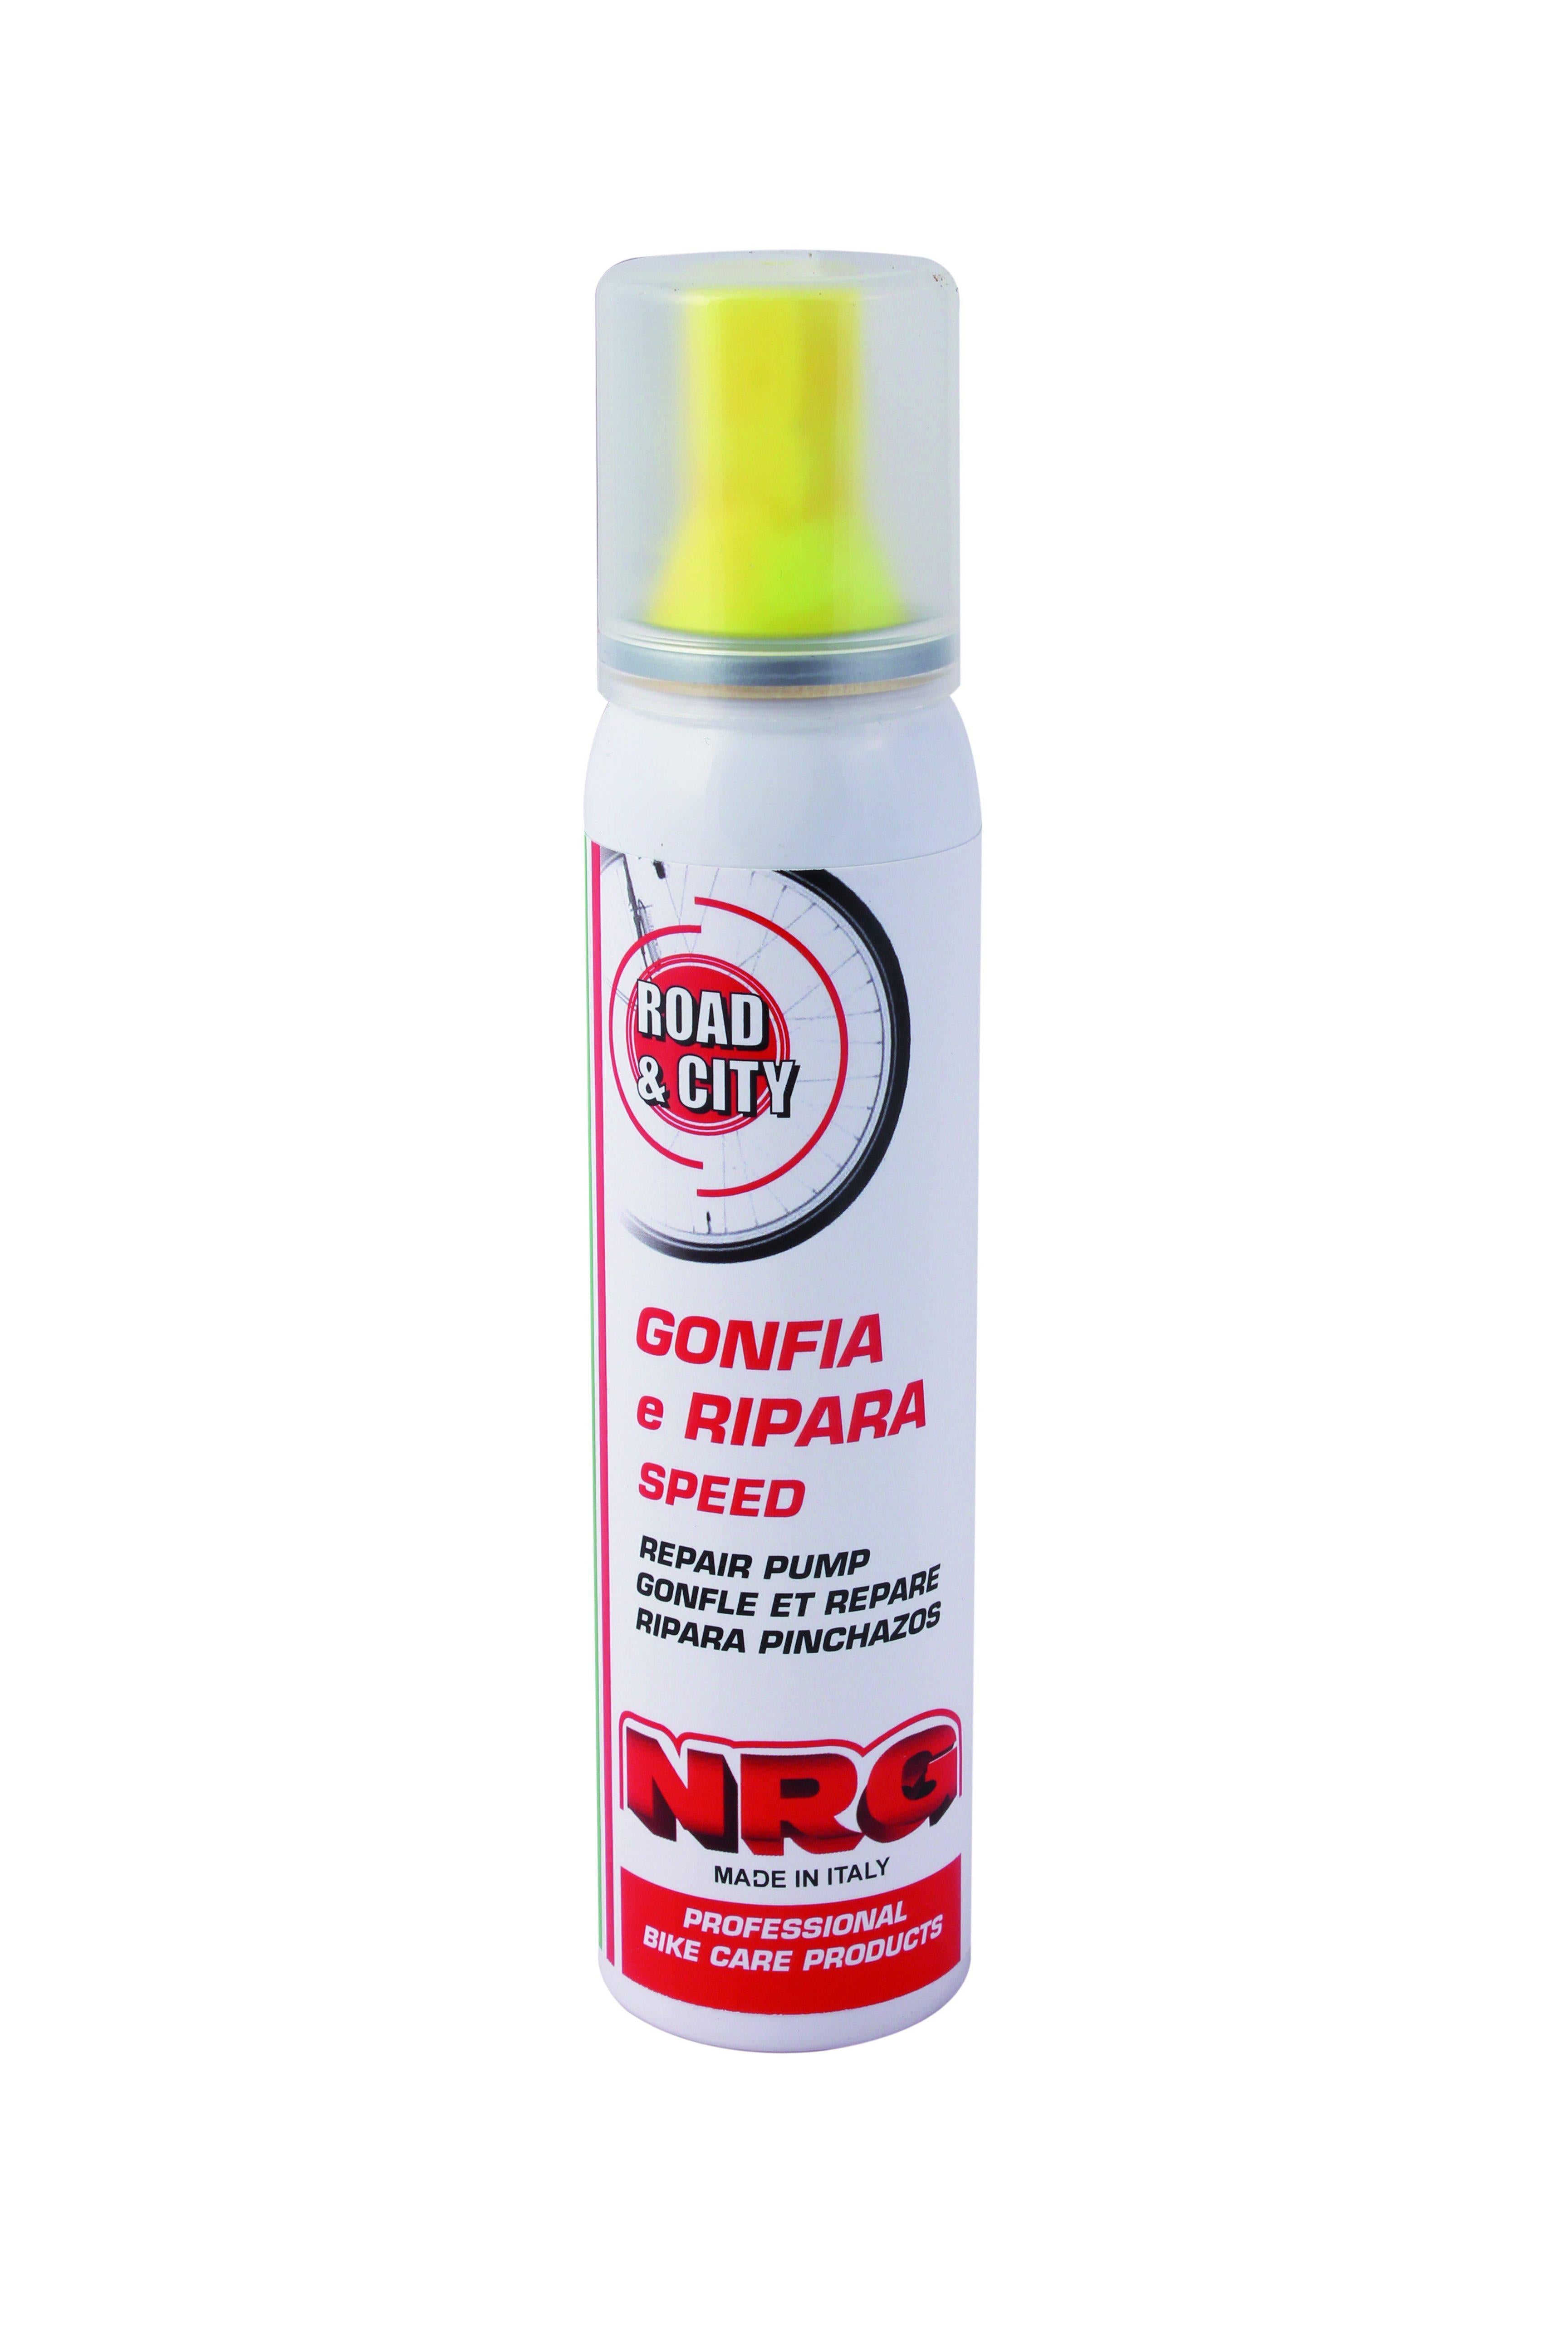 NRG-Tyre Inflate & Repair With Sealant-Speed Road & City Alliance Auto Products